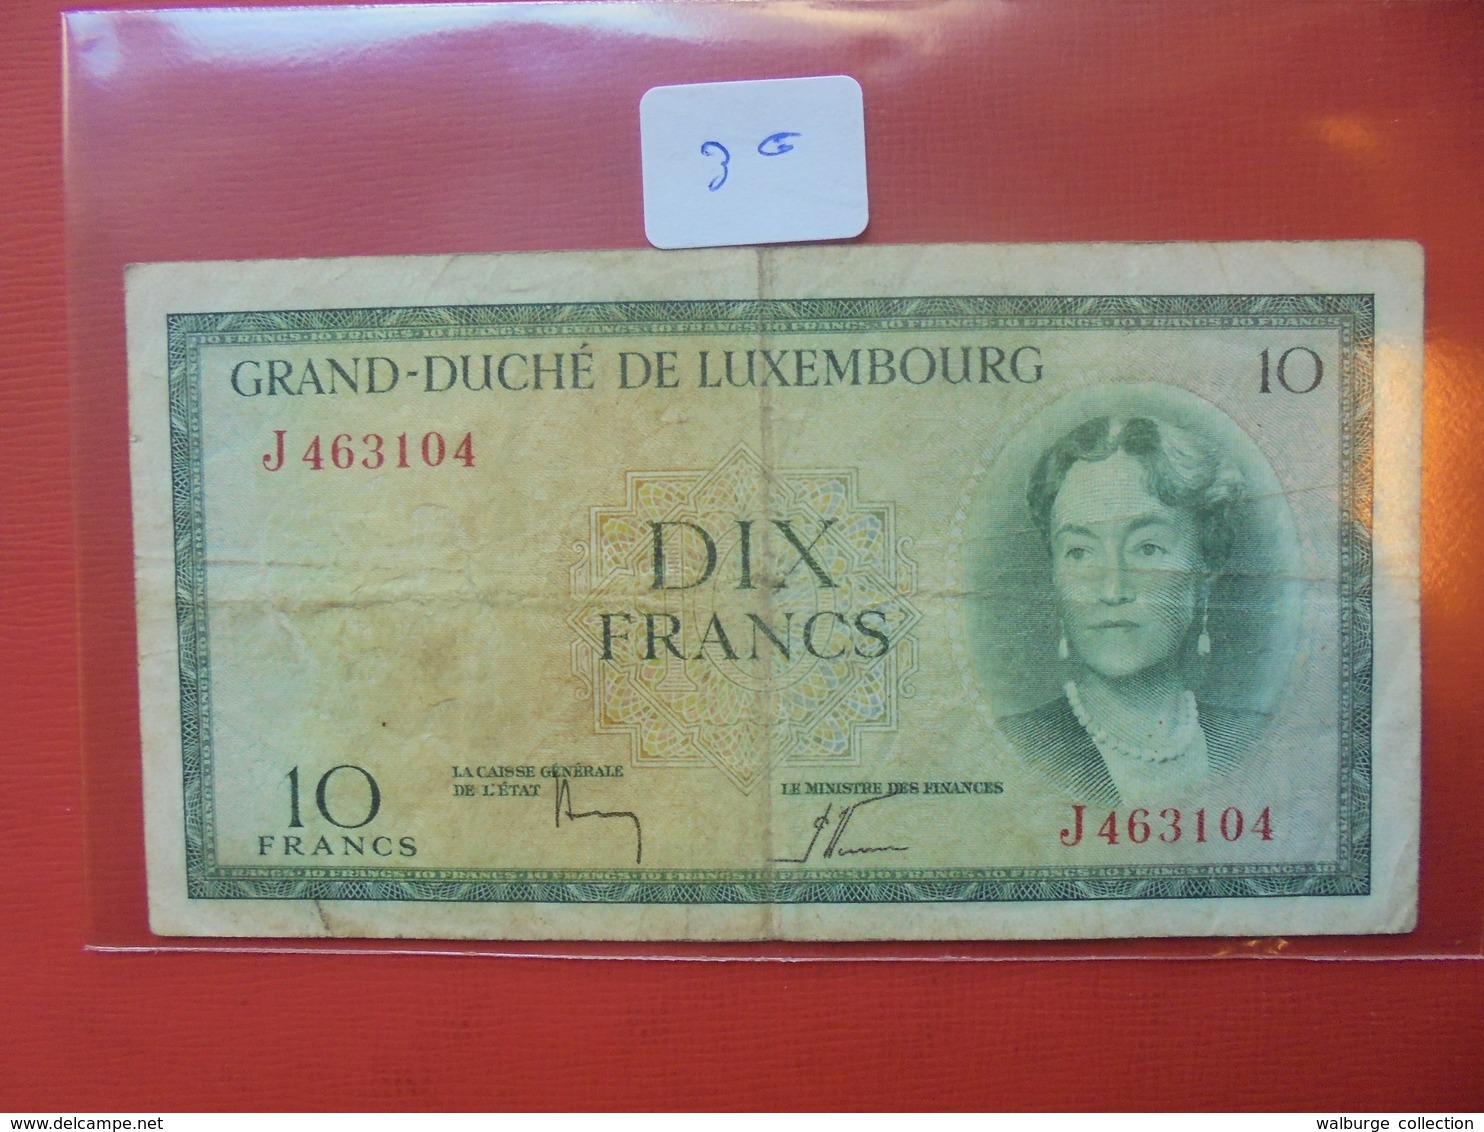 LUXEMBOURG 10 FRANCS (NON-DATE) CIRCULER - Luxembourg